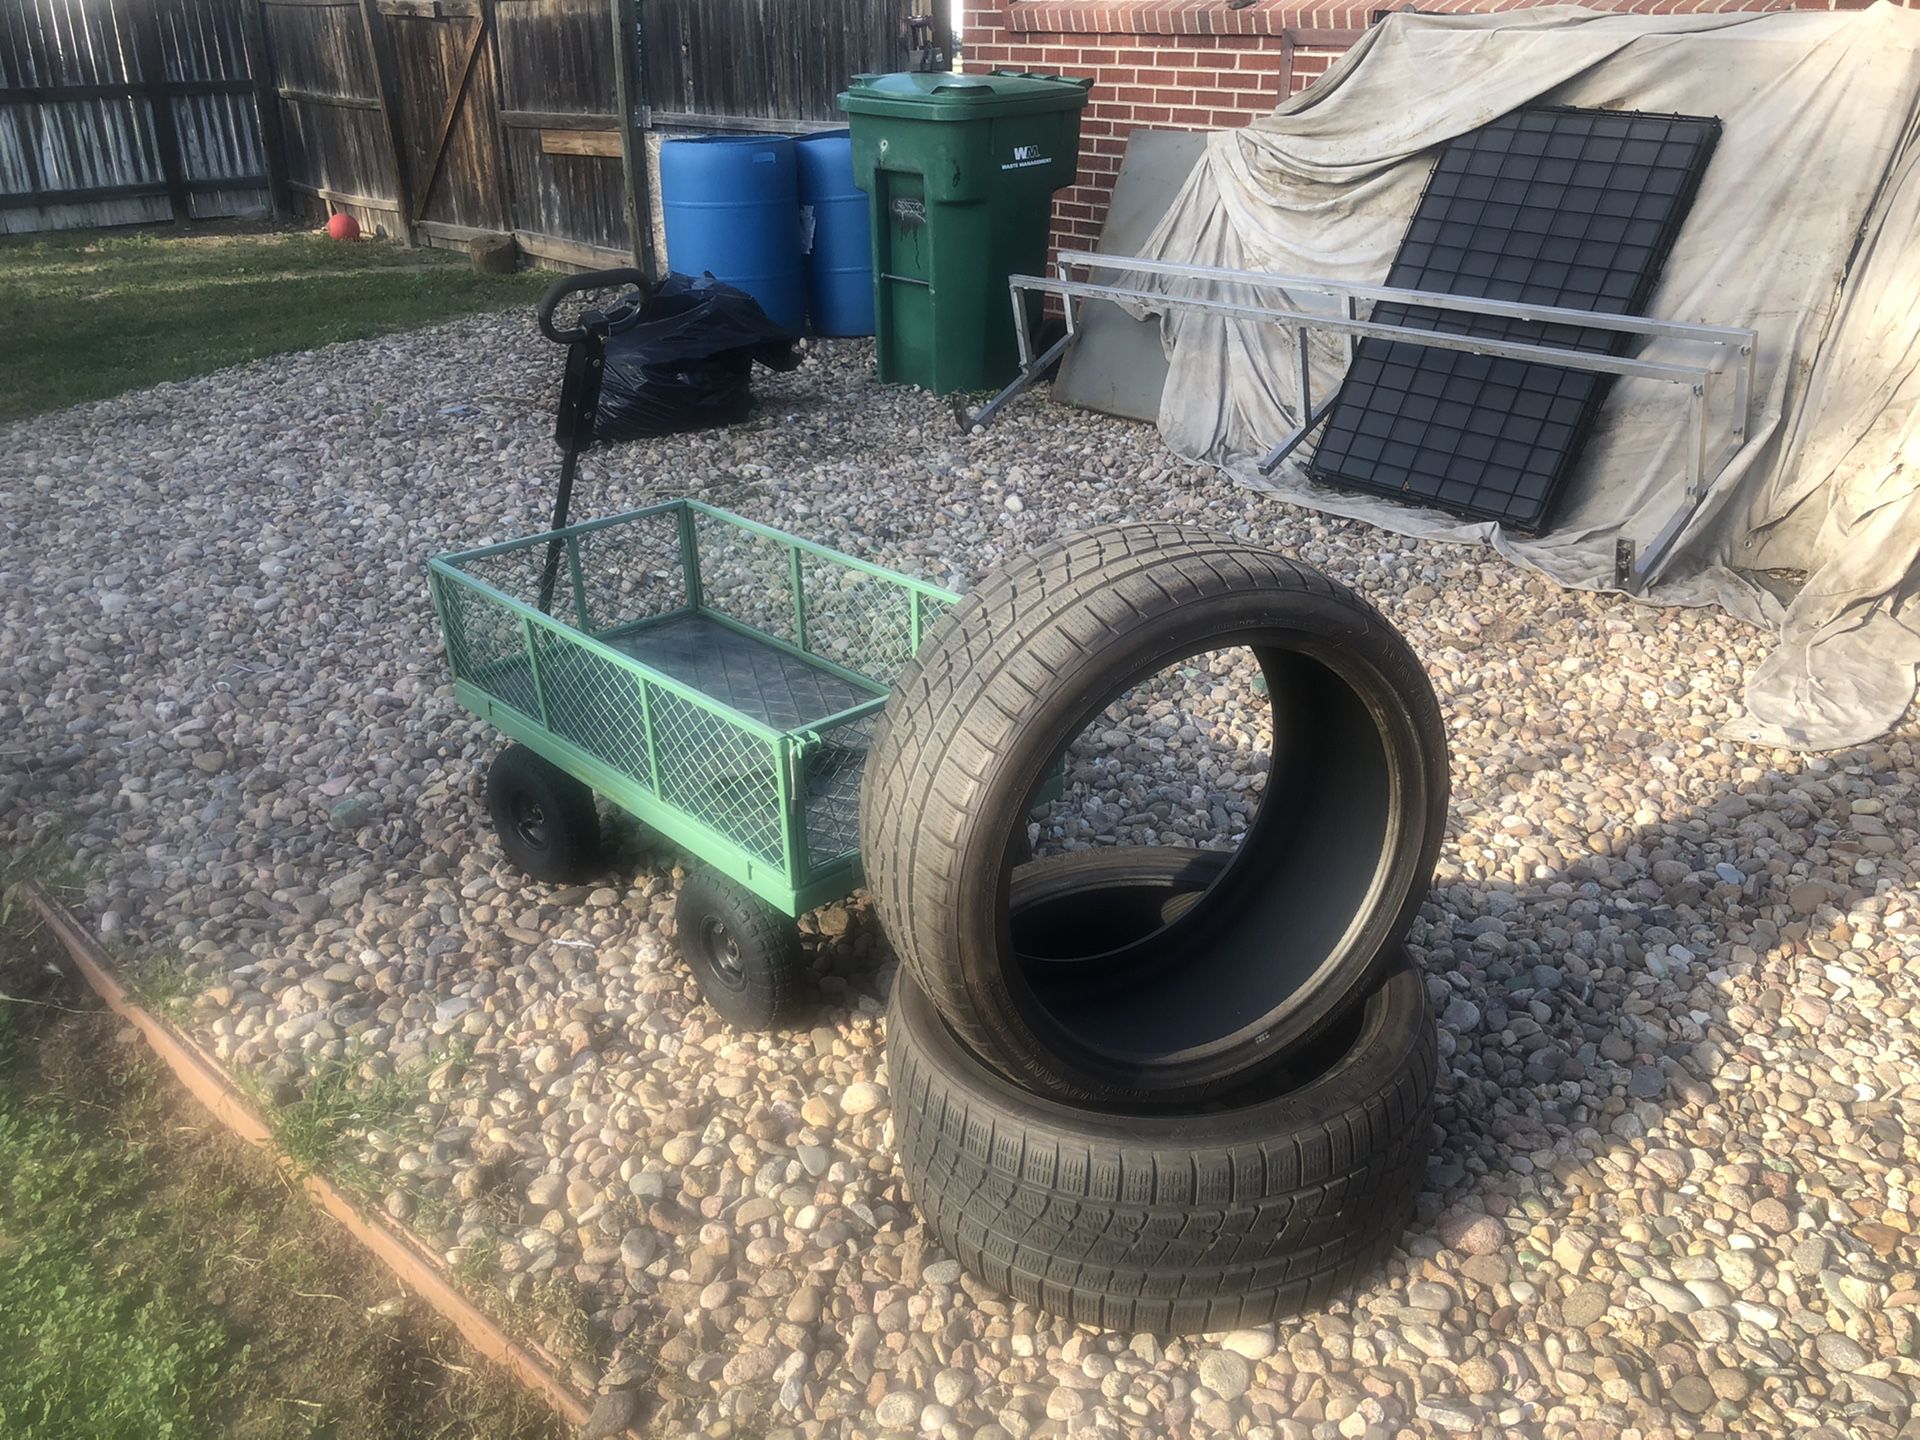 tires and little cart for sale! 265, 35, 20. Almost new. Tires:$80. Cart:$40